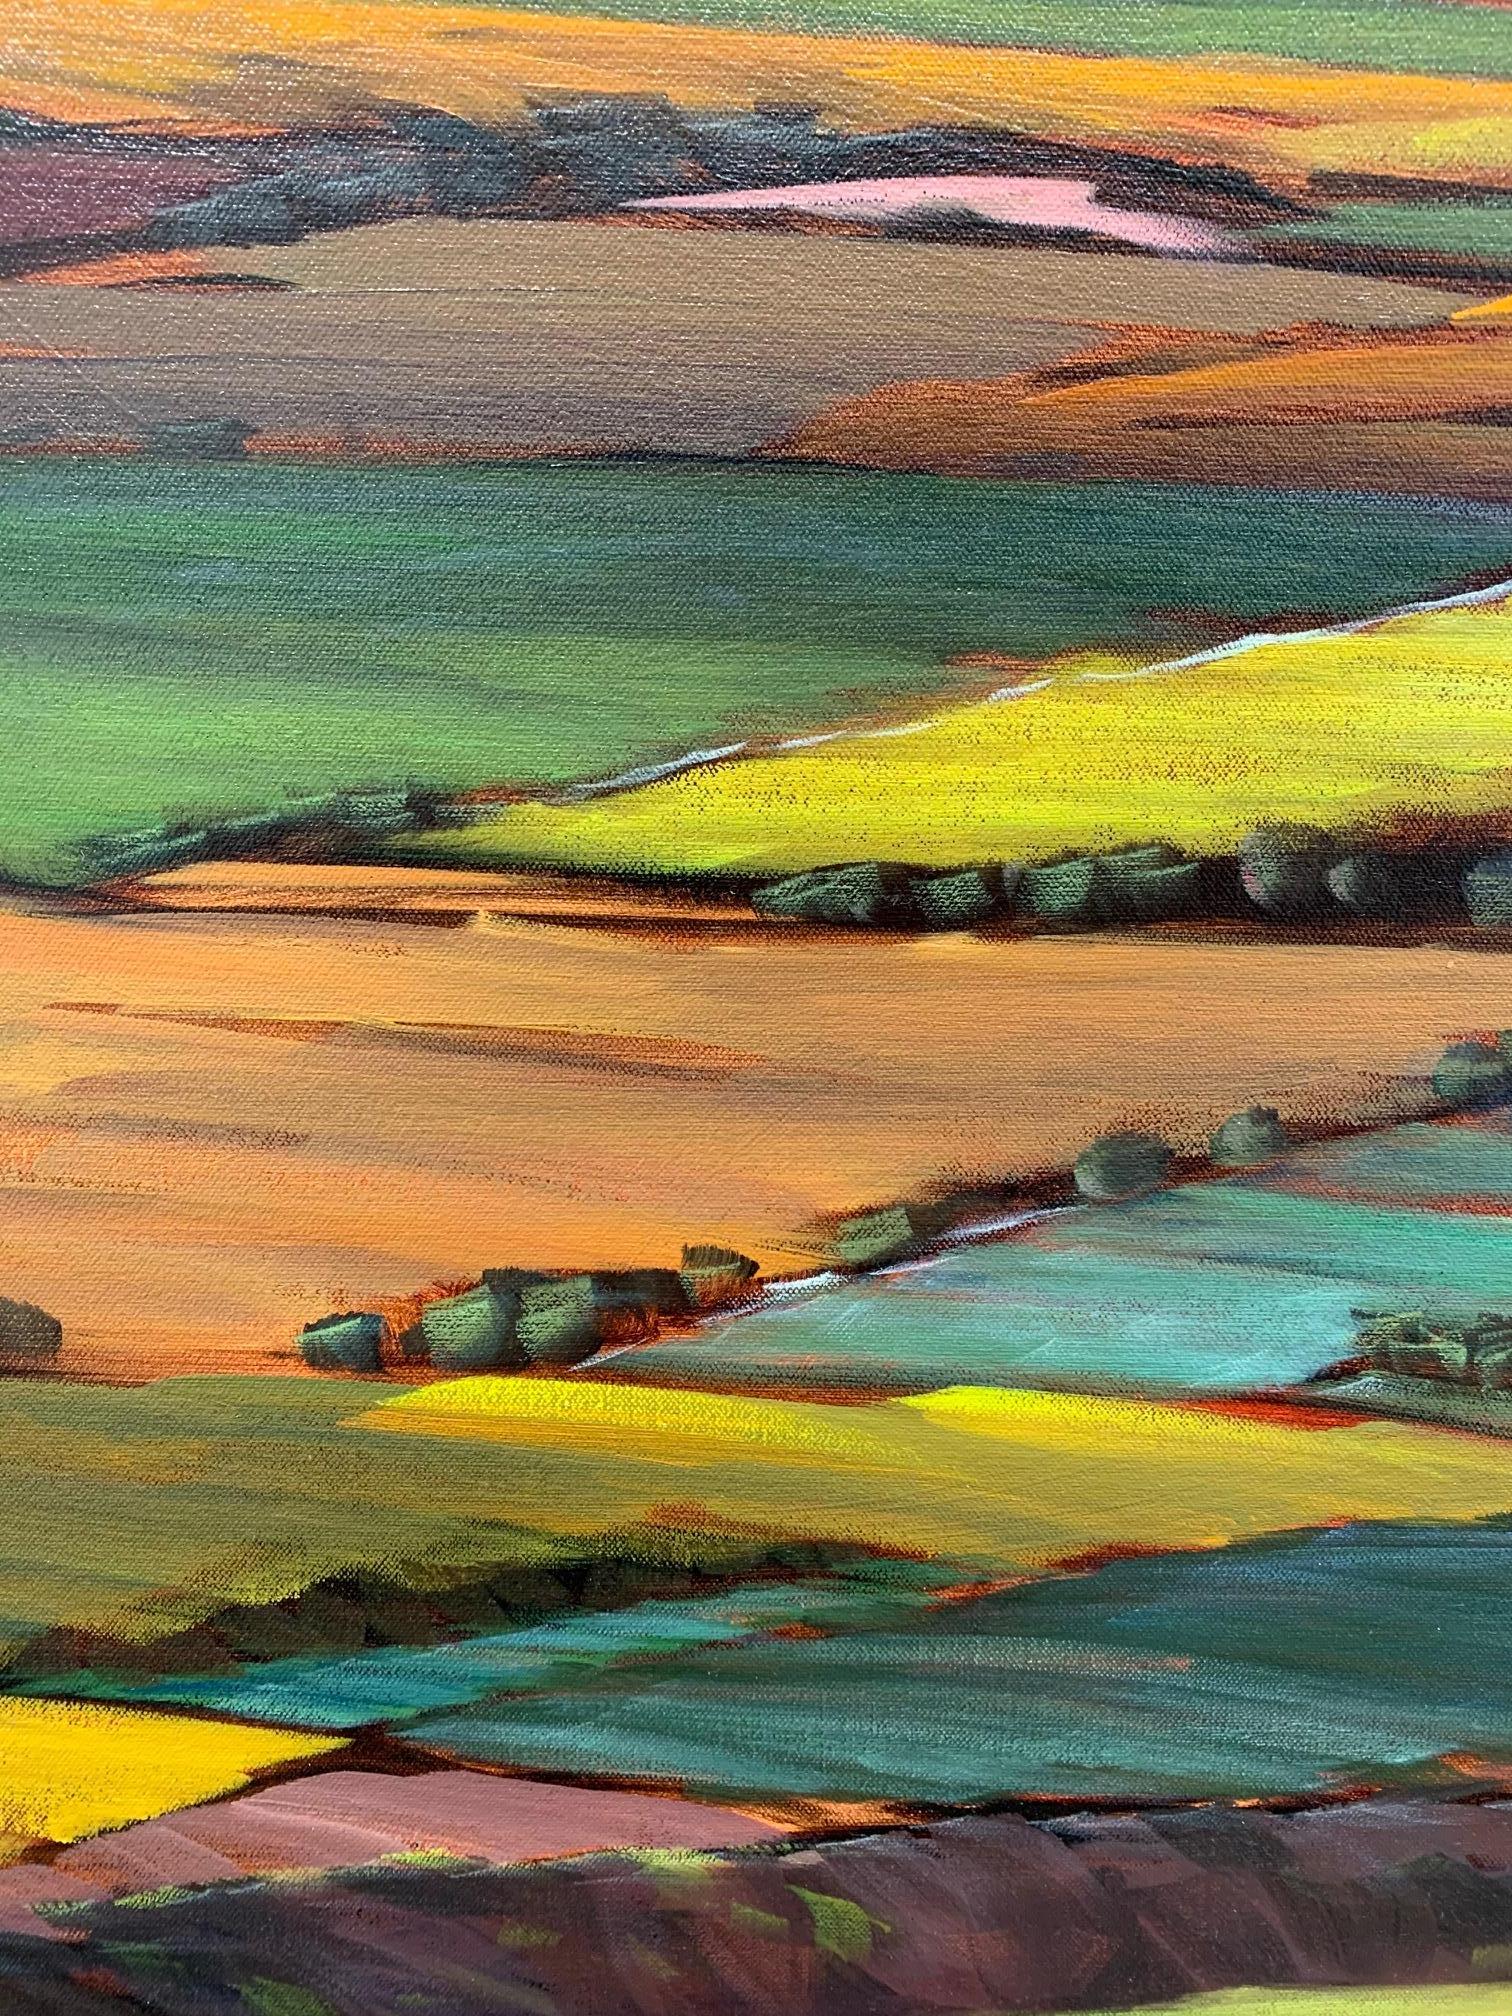 This contemporary, traditional, vast prairie landscape, depicts a beautiful patchwork pattern on the landscape, like the view plane passengers see from the sky.

Ross Penhall is a disciplined and prolific artist who has exhibited annually since